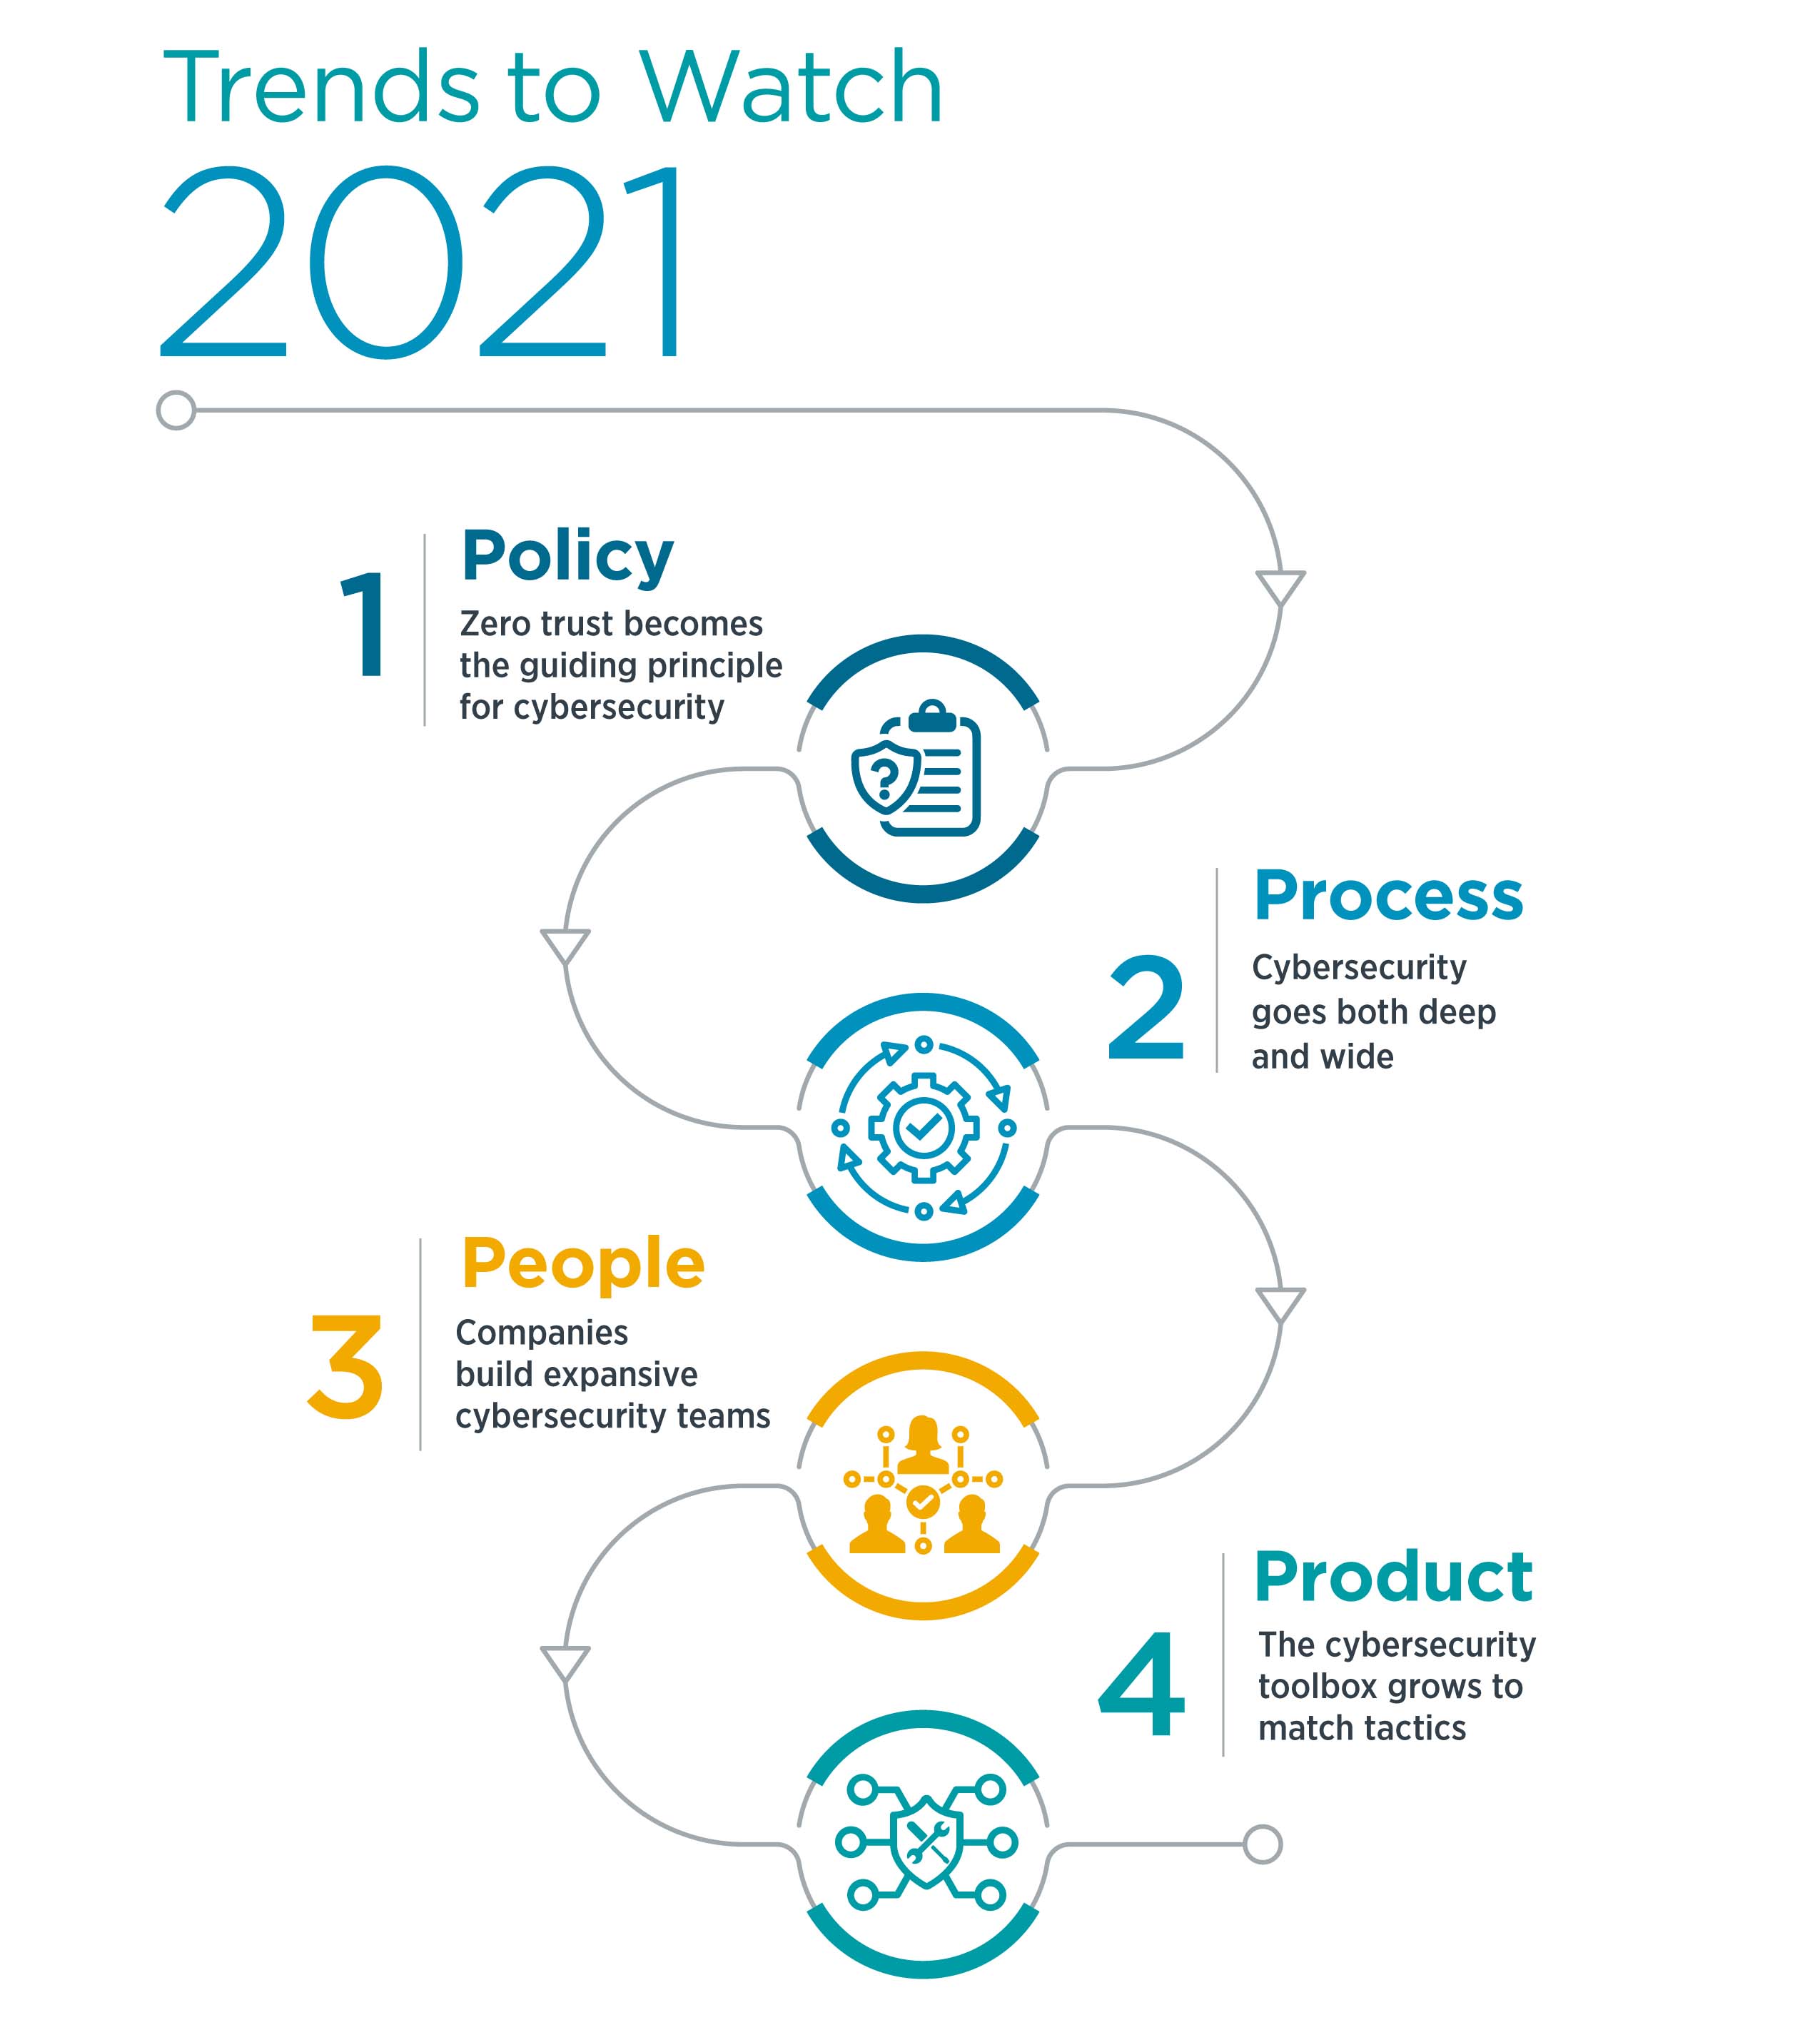 Trends to Watch 2021